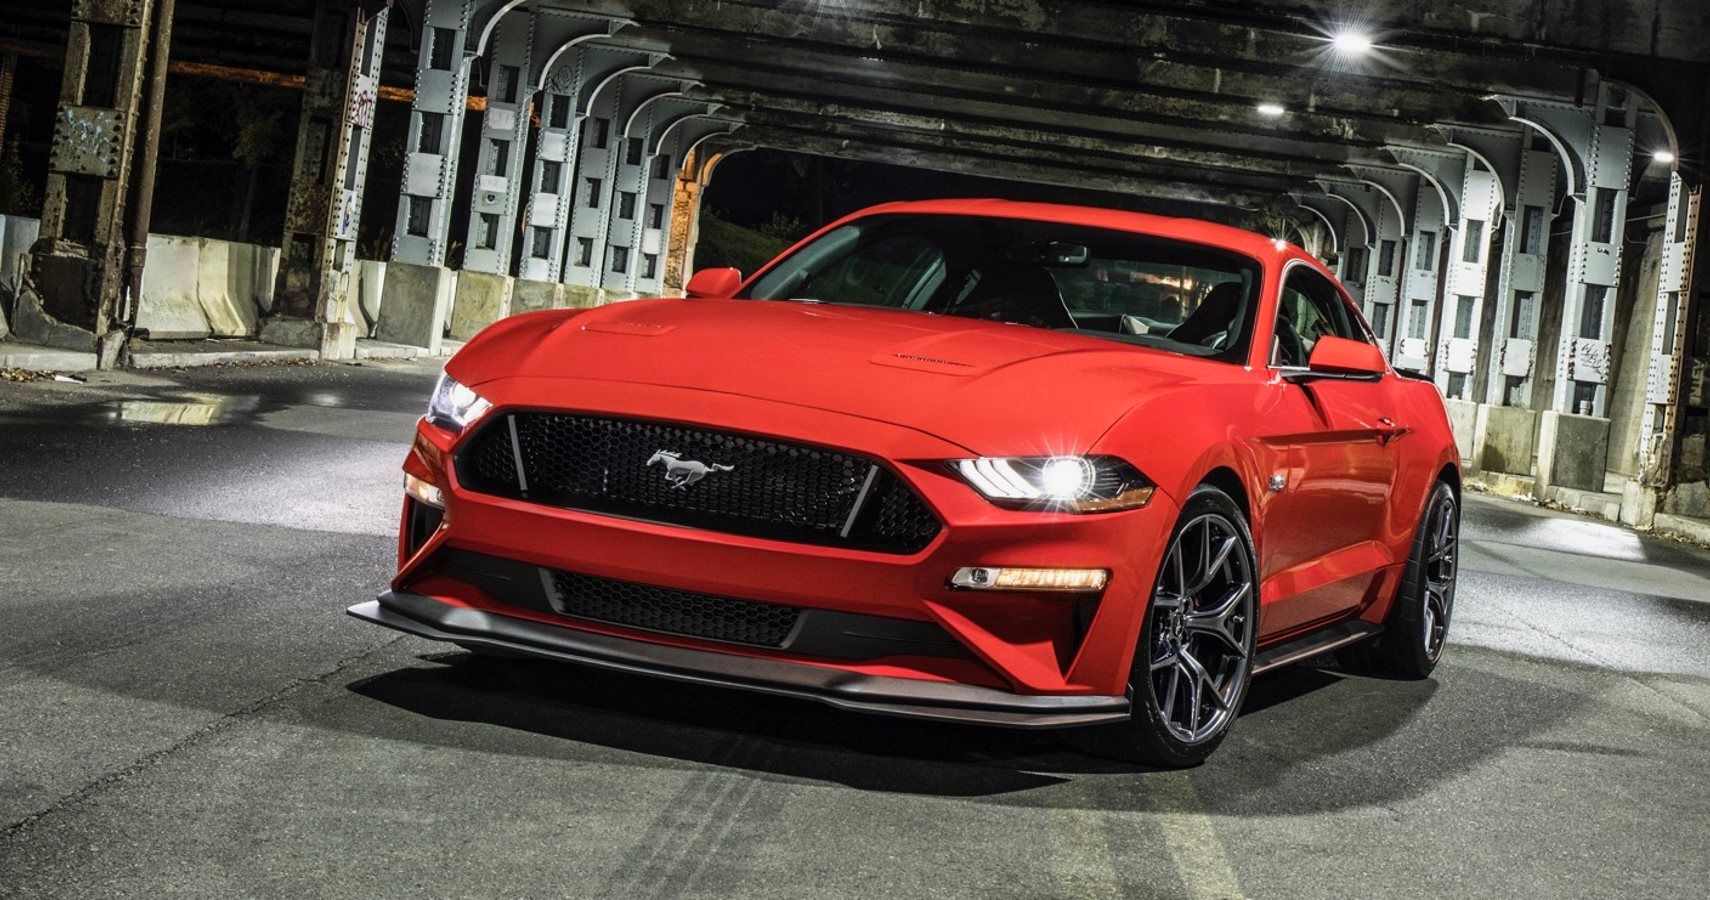 Ford Rumored To Move Mustang To New Platform As 7th Gen Gets Delayed